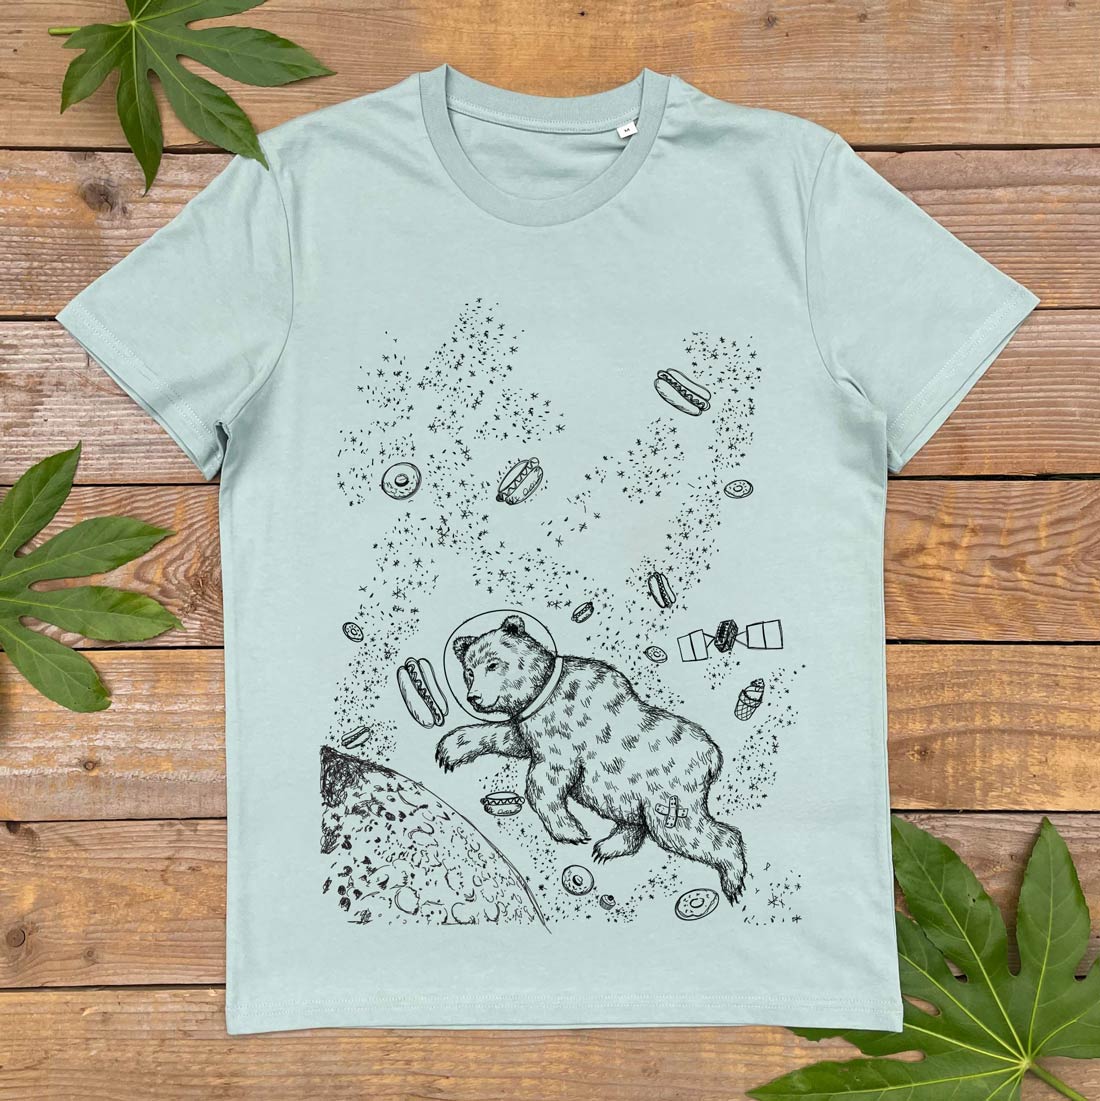 mint tshirt with bear and hot dogs in space